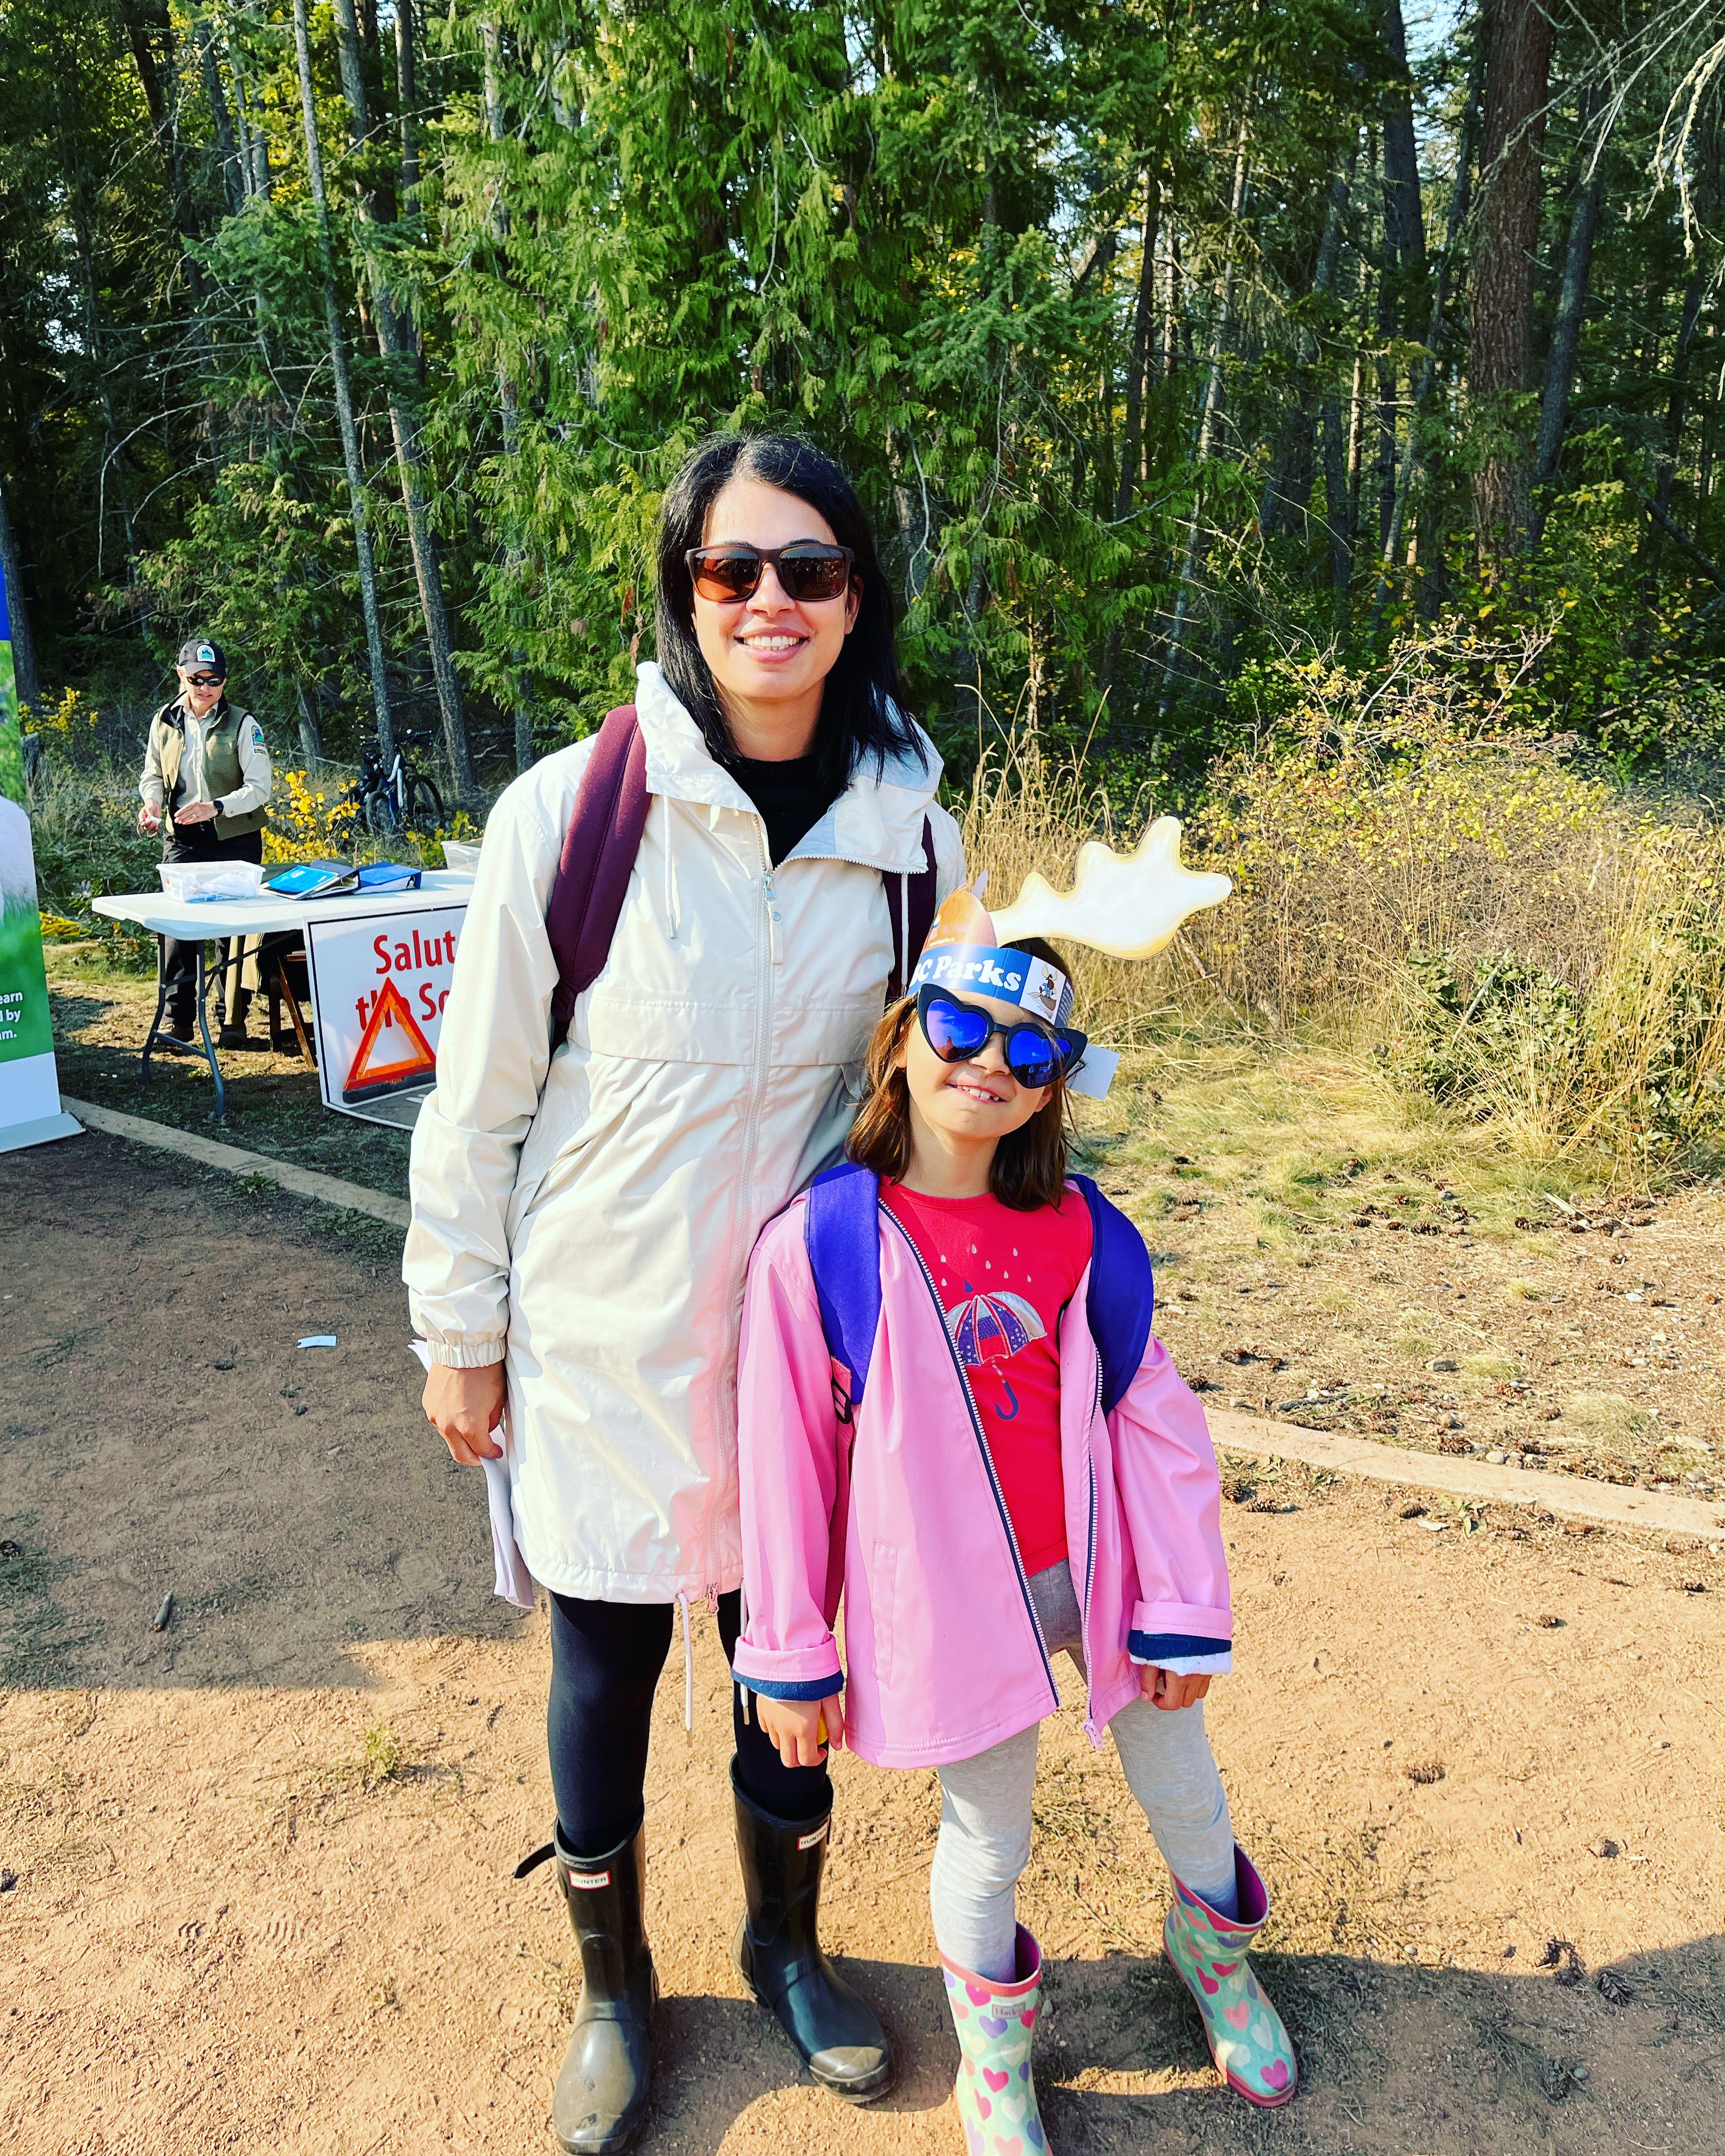 A woman and child in fall gear and wearing sunglasses stand by the forest with a promotional booth visible in the background